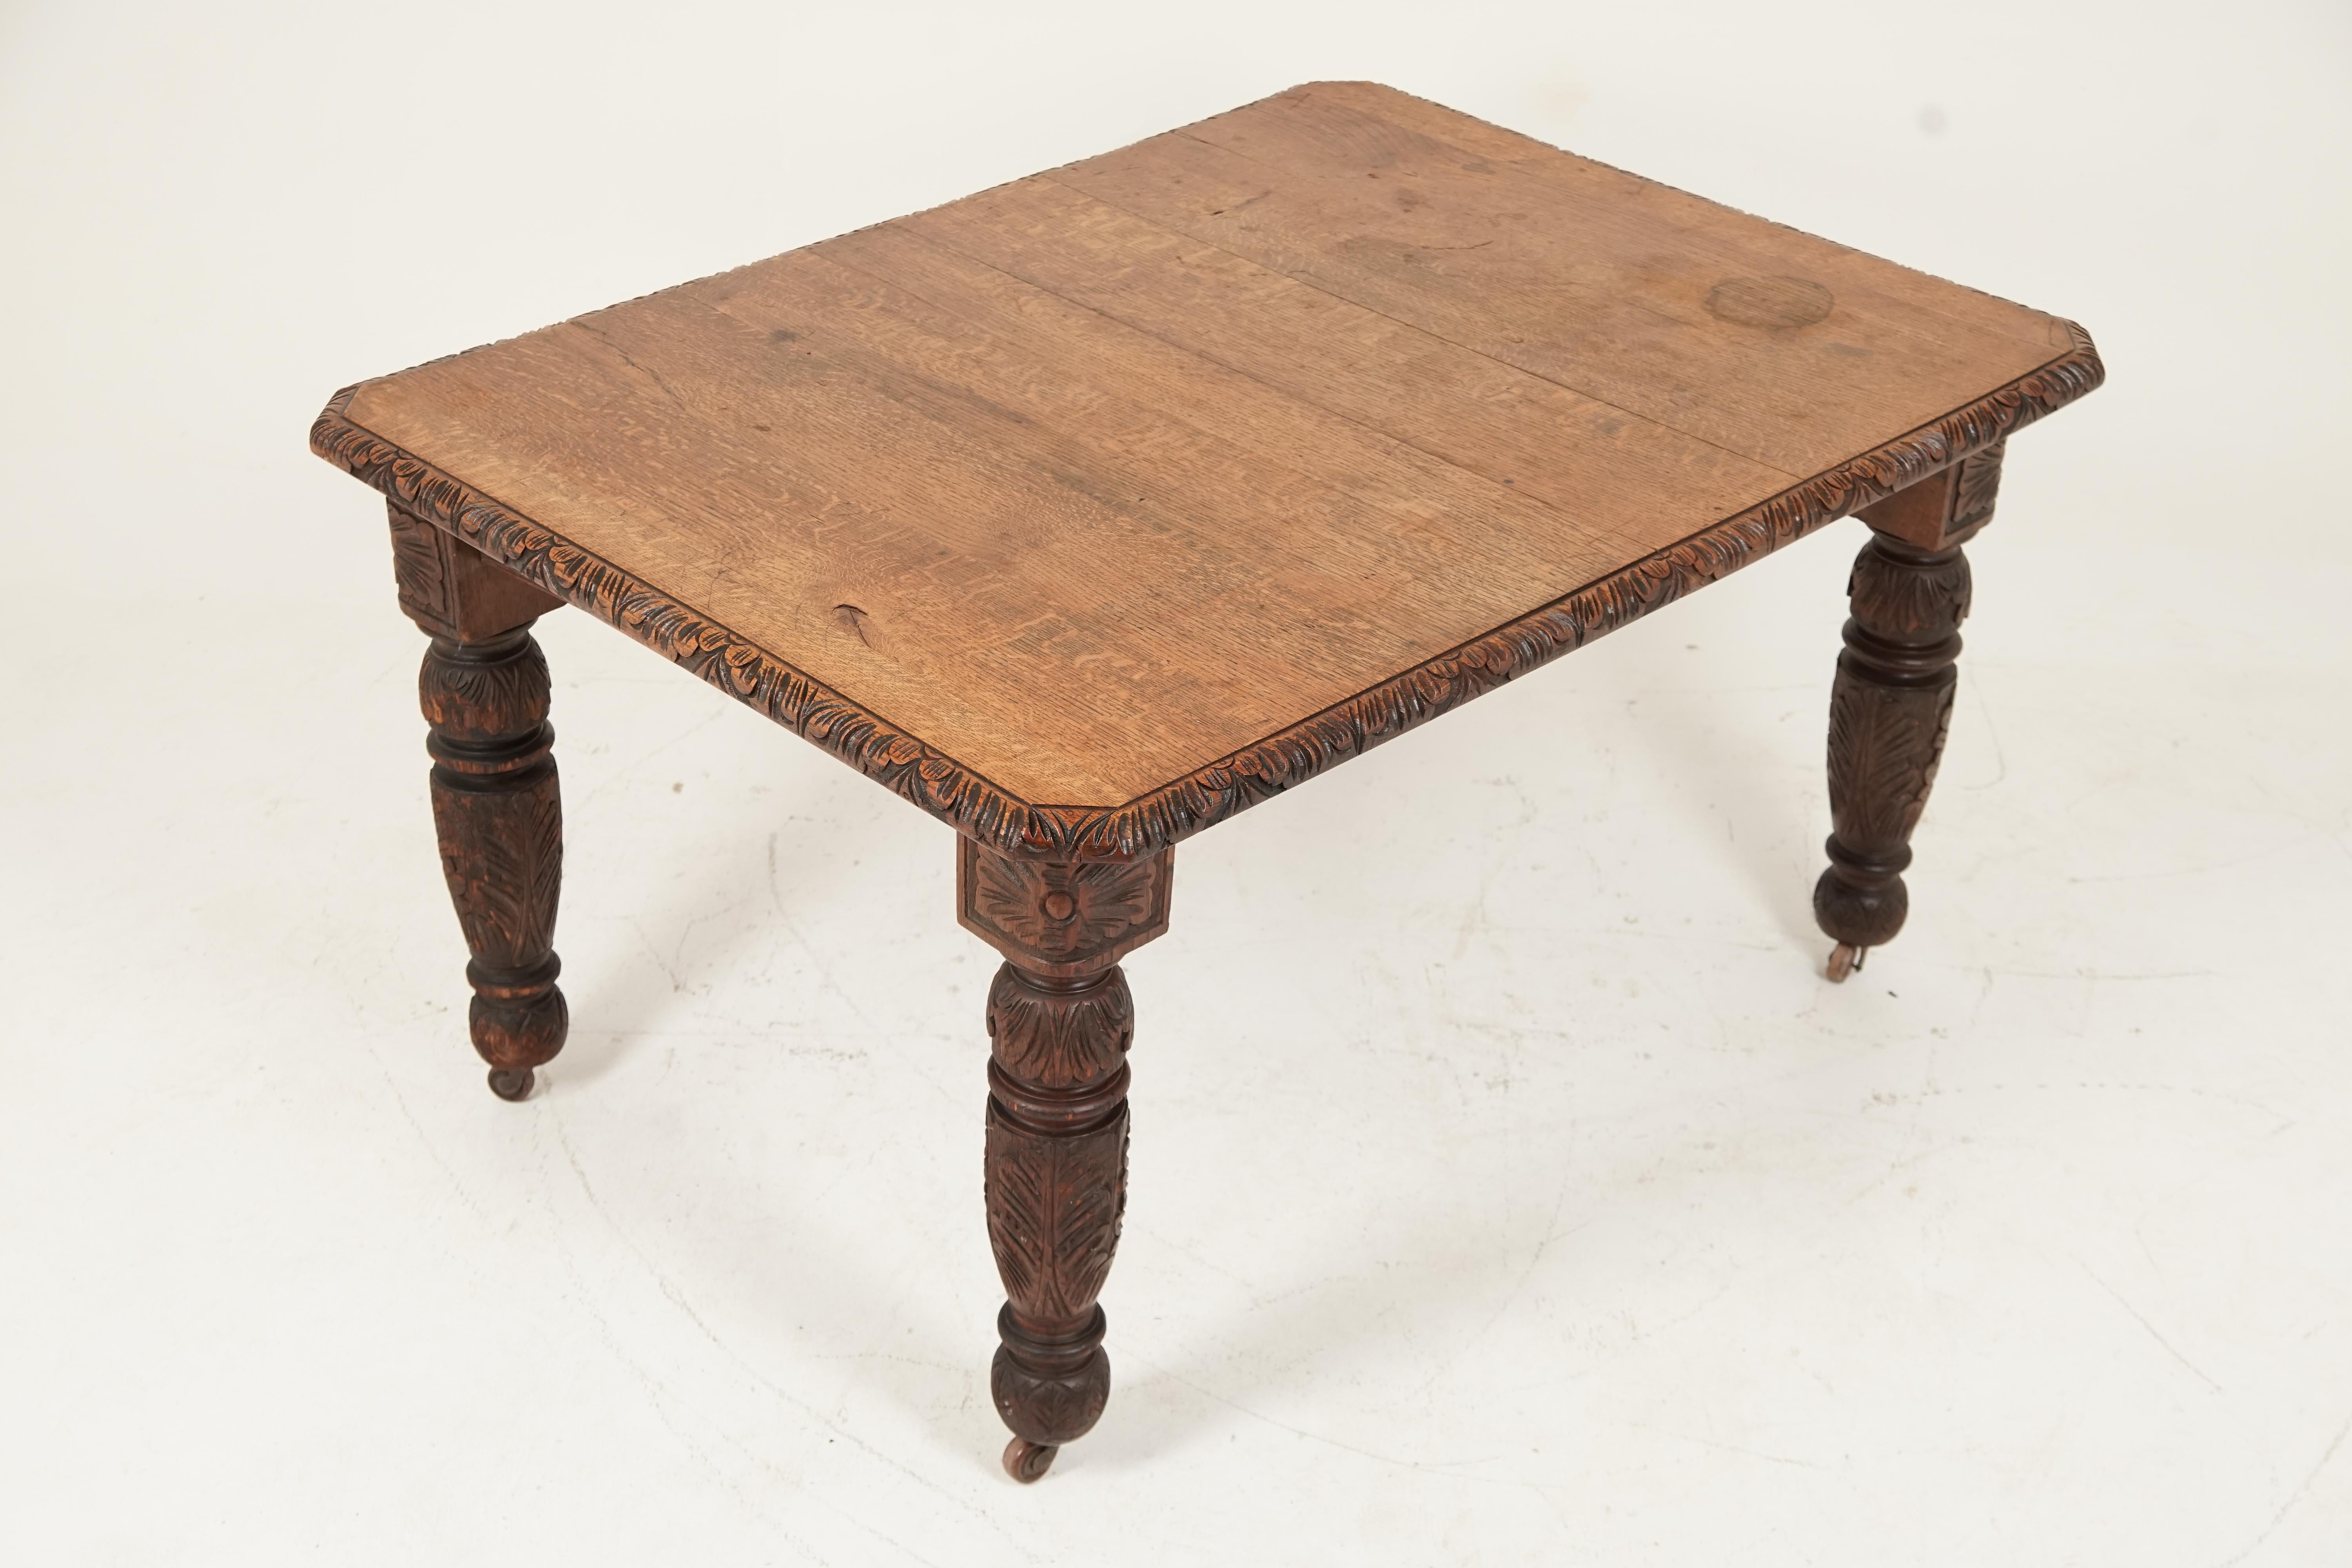 Antique Victorian carved oak extending gothic 2 leaf dining table, Scotland 1870, B2450 

Scotland 1870
Solid oak
Original finish
Two inch thick table top with carved rounded border
Standing on 4 carved solid oak Gothic style legs 5